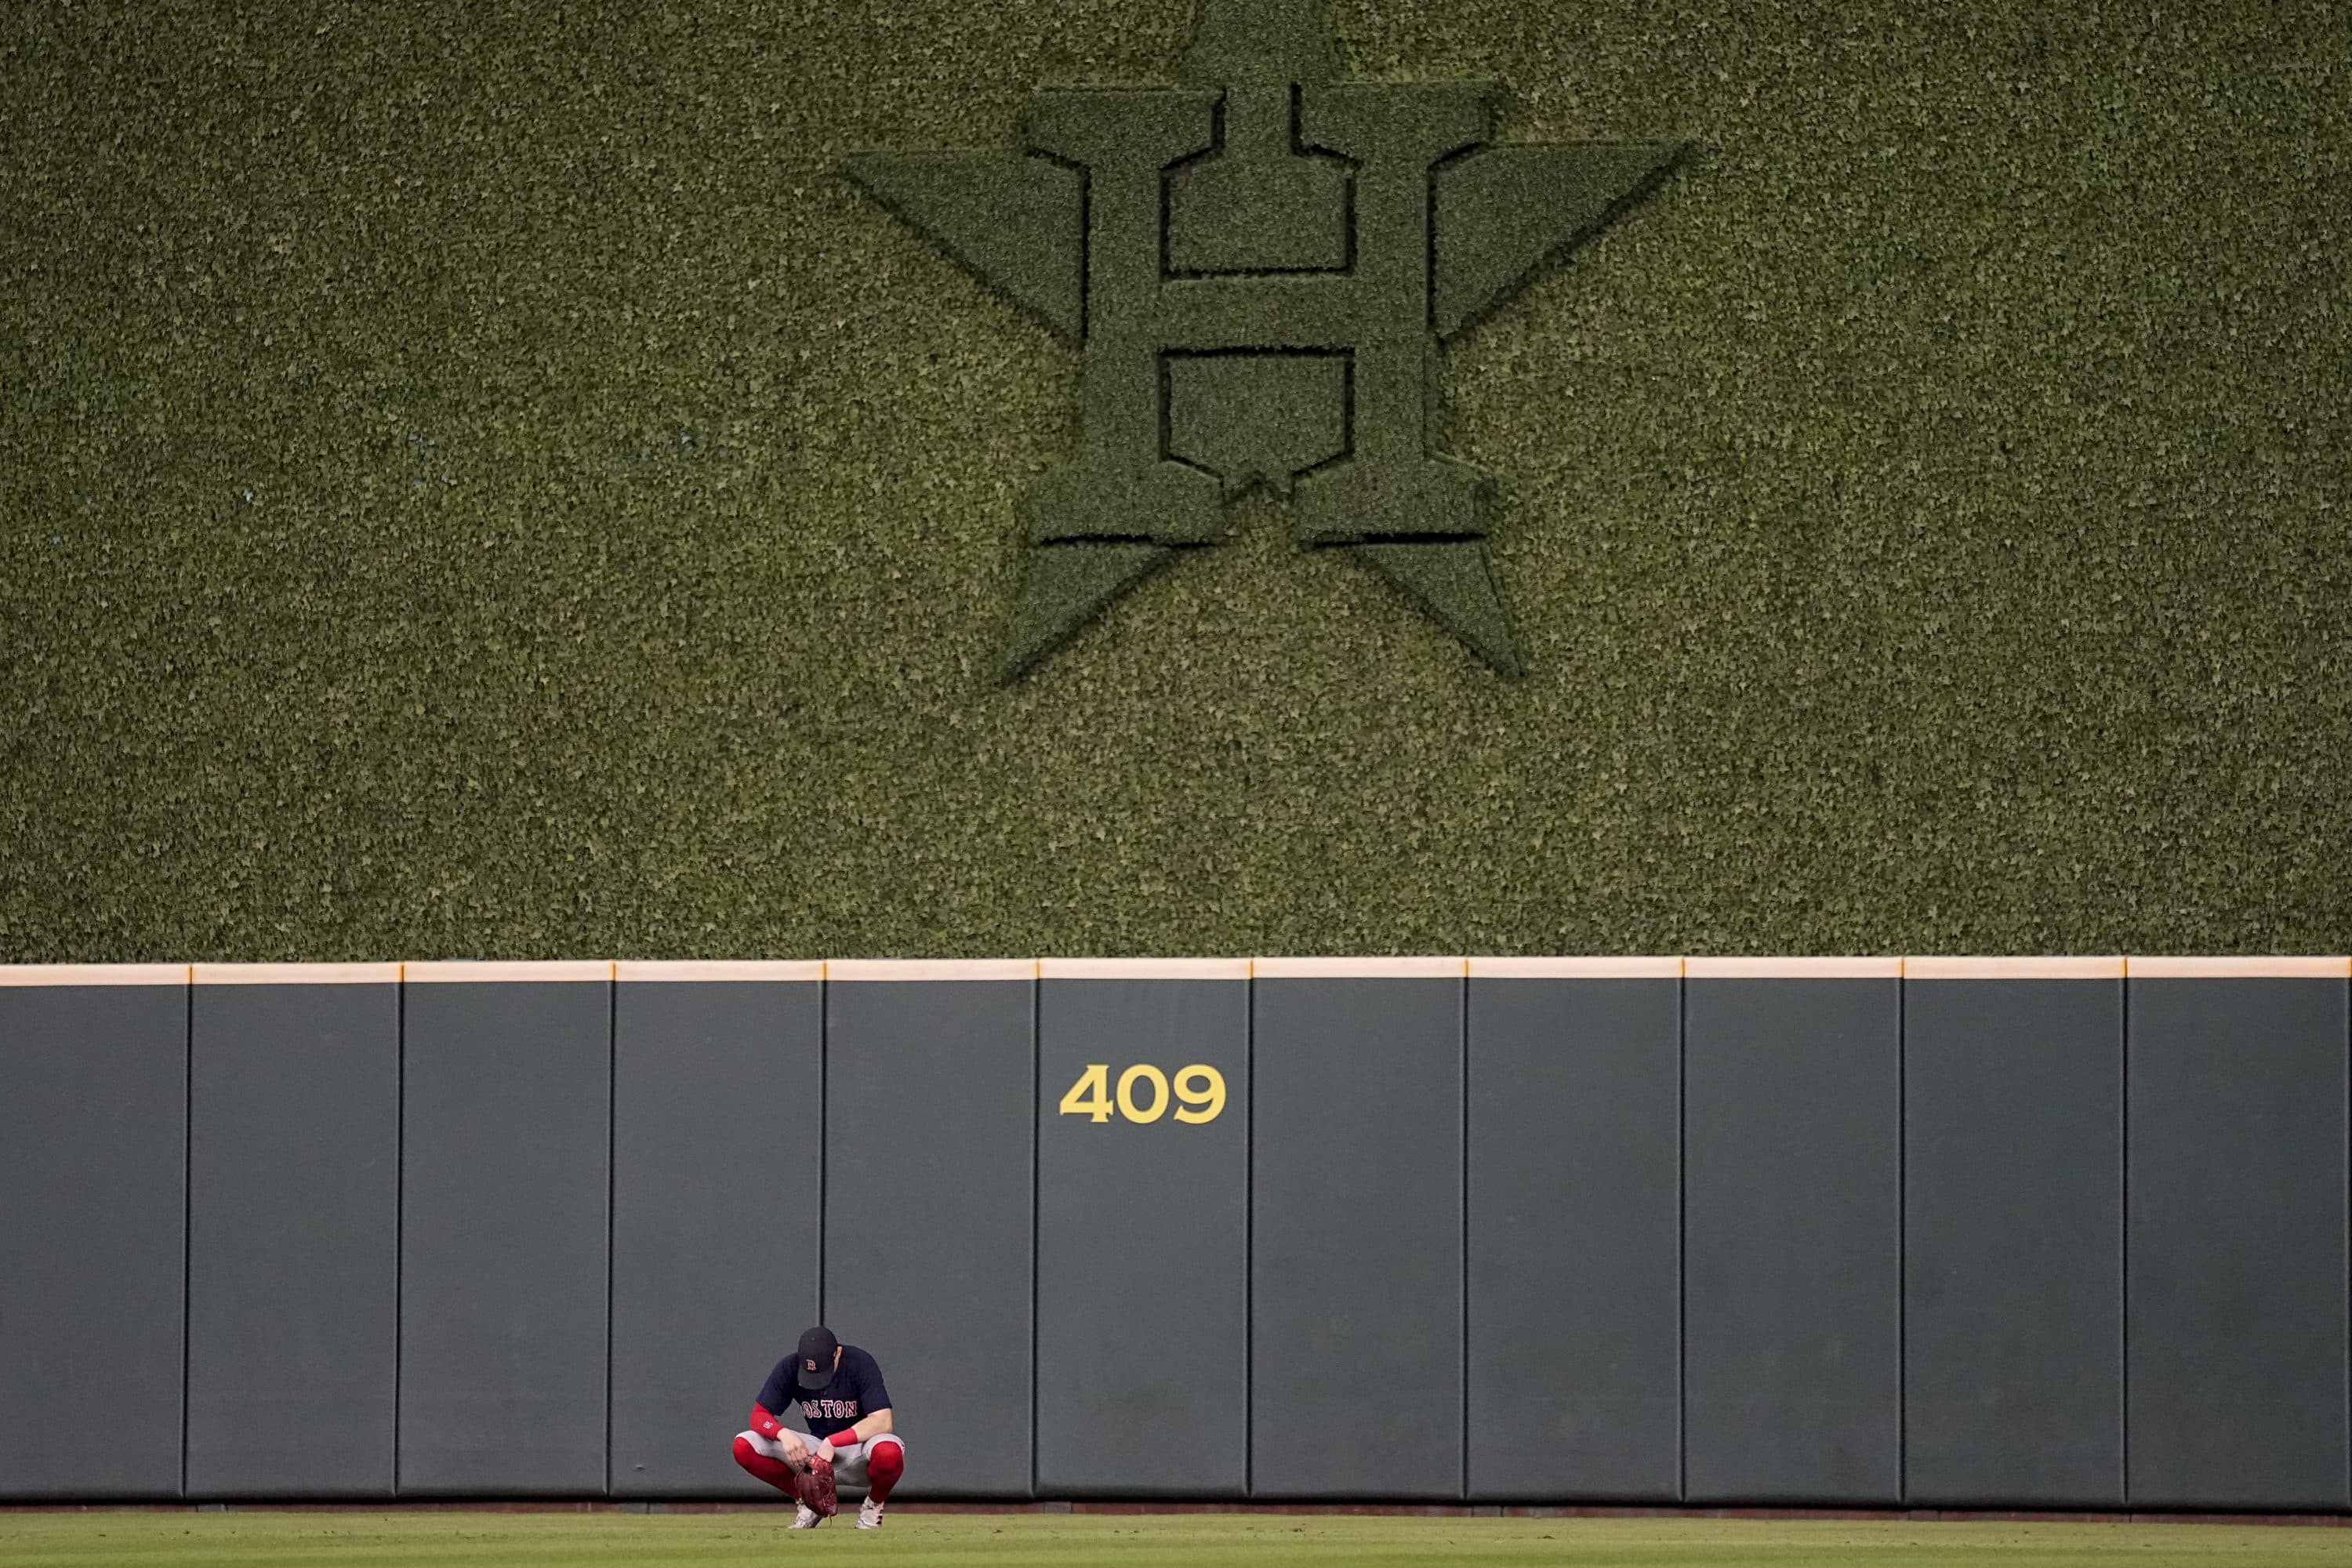 Boston Red Sox center fielder Enrique Hernandez waits in the outfield during the eighth inning in Game 6 of baseball's American League Championship Series Houston Astros Friday, Oct. 22, 2021, in Houston. (David J. Phillip/AP)